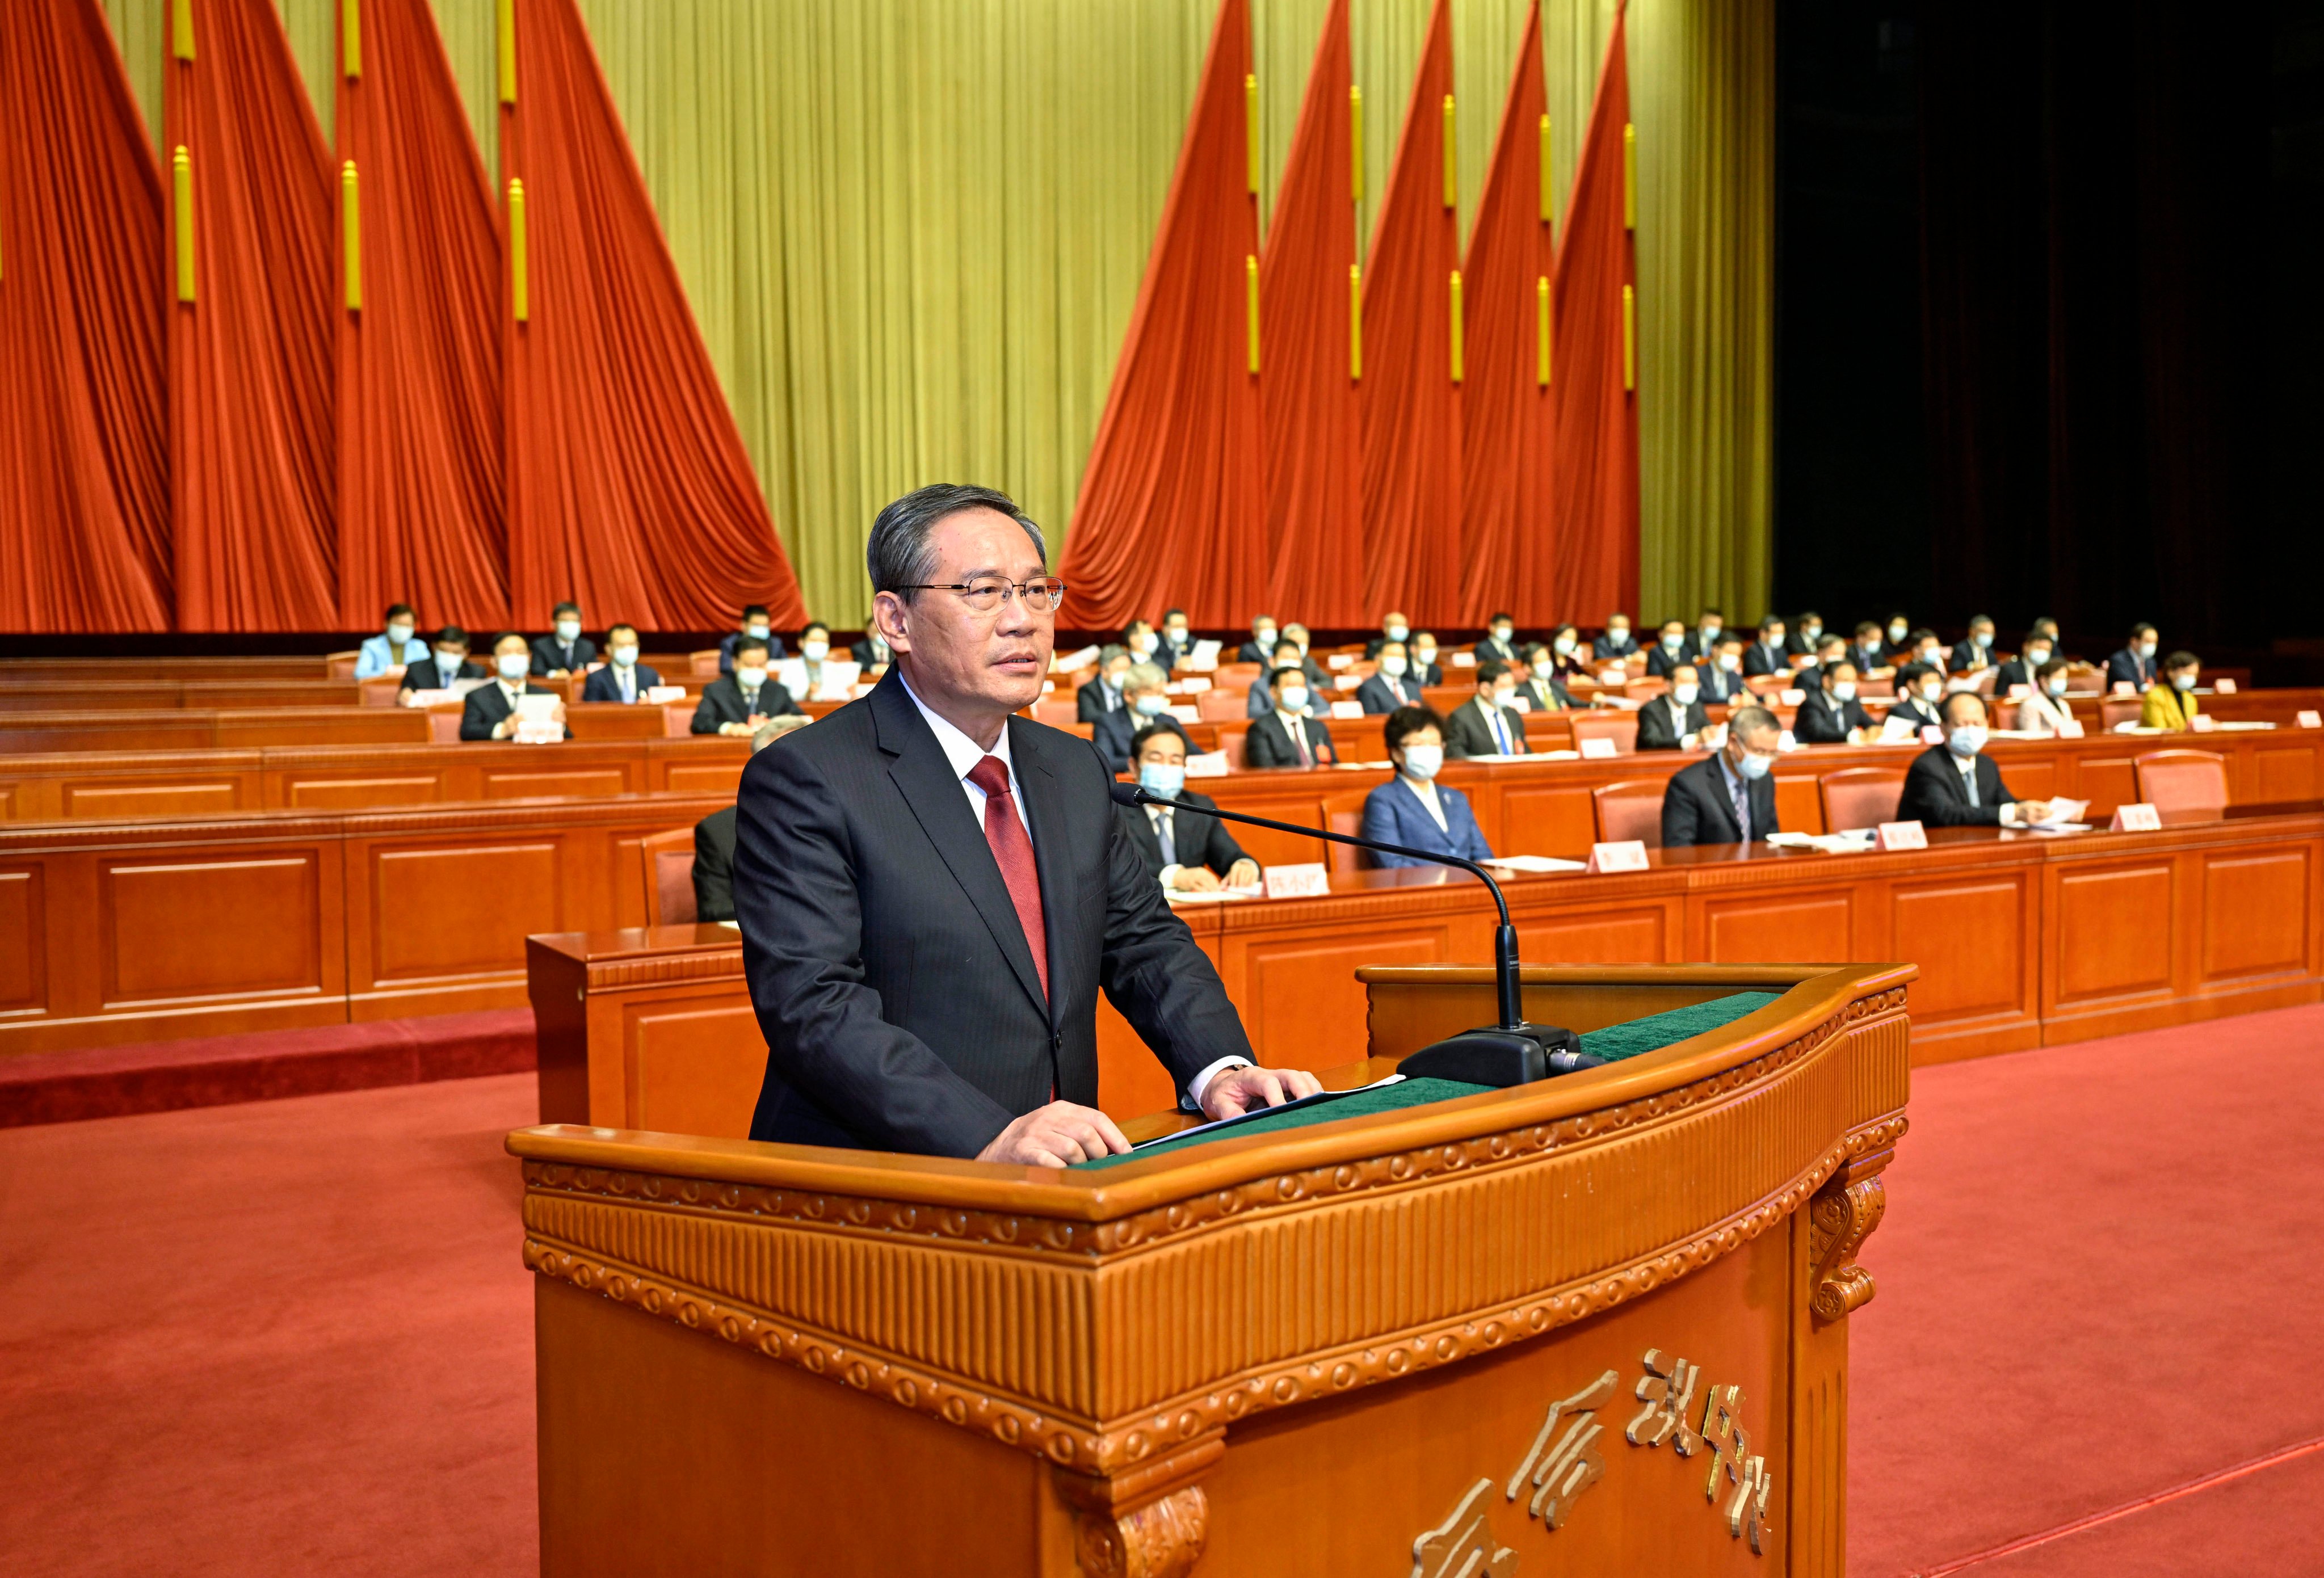 Li Qiang, a member of the Standing Committee of the Politburo of the Communist Party of China (CPC) Central Committee, attends the opening of the 17th national congress of the Chinese Peasants and Workers Democratic Party. Photo: Xinhua